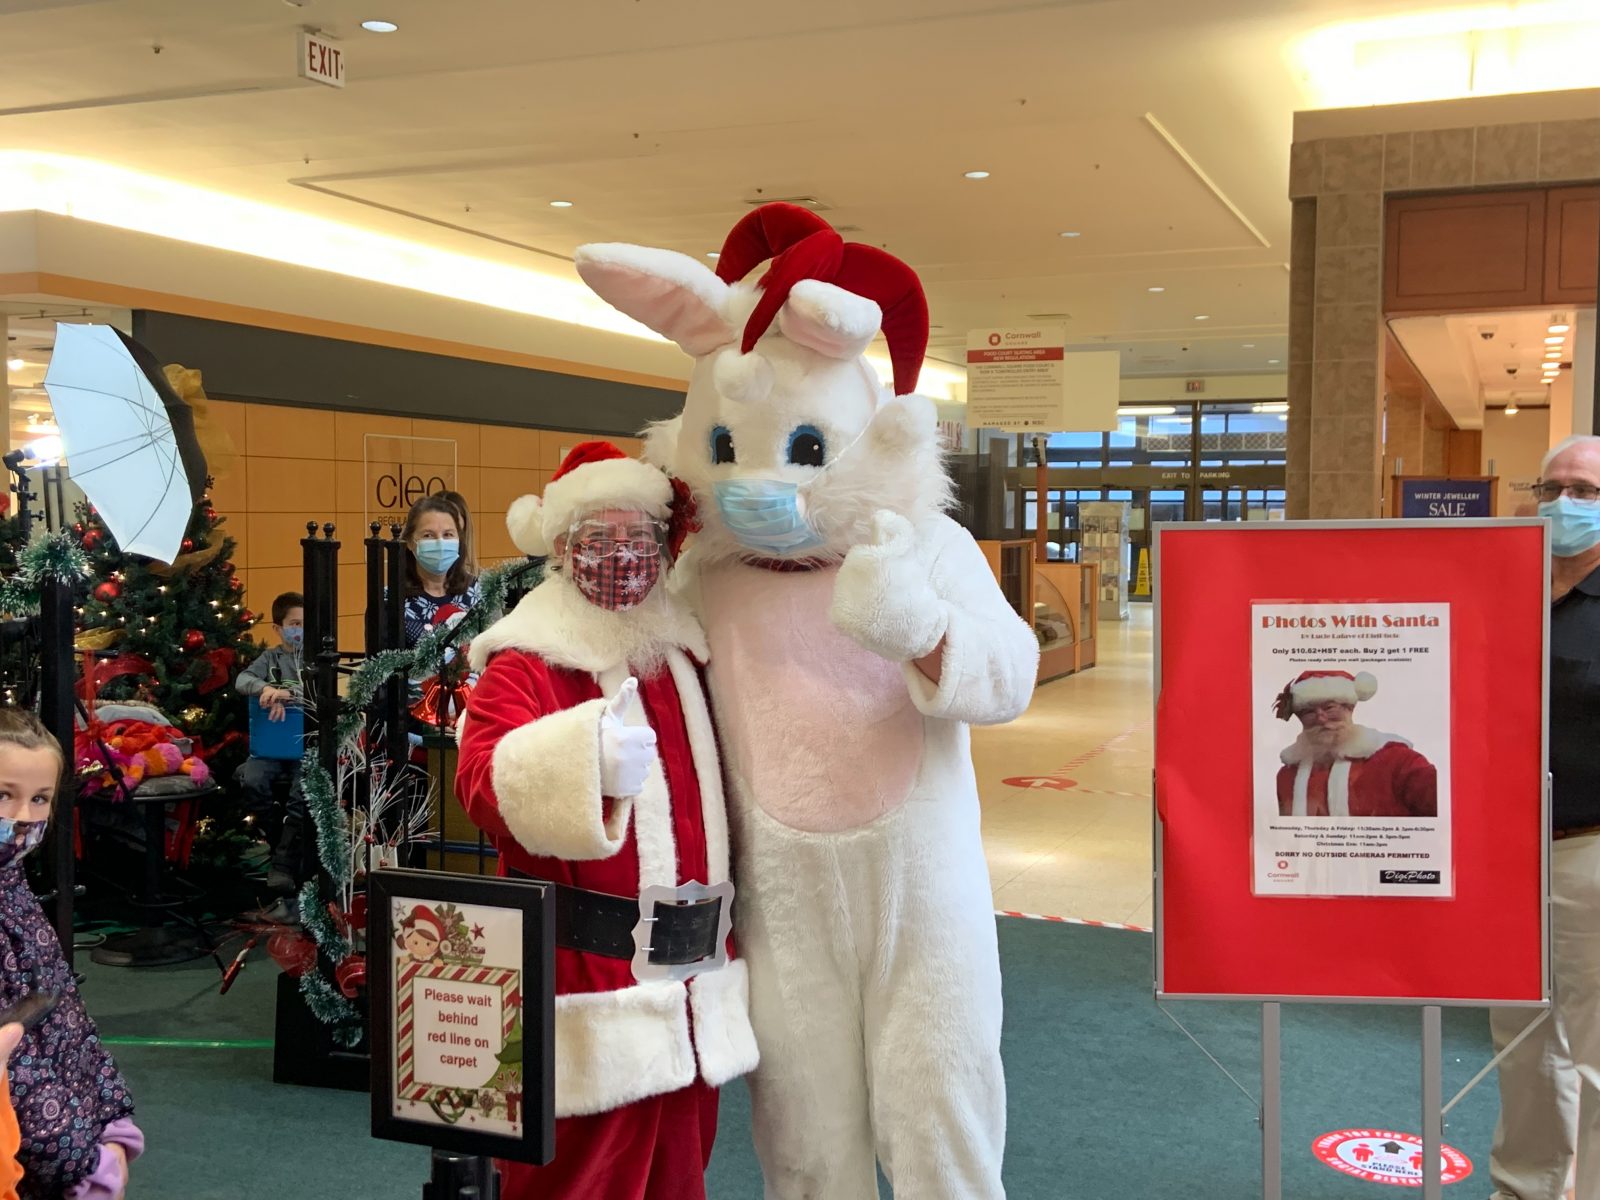 Santa Claus gets a visit from the Easter Bunny